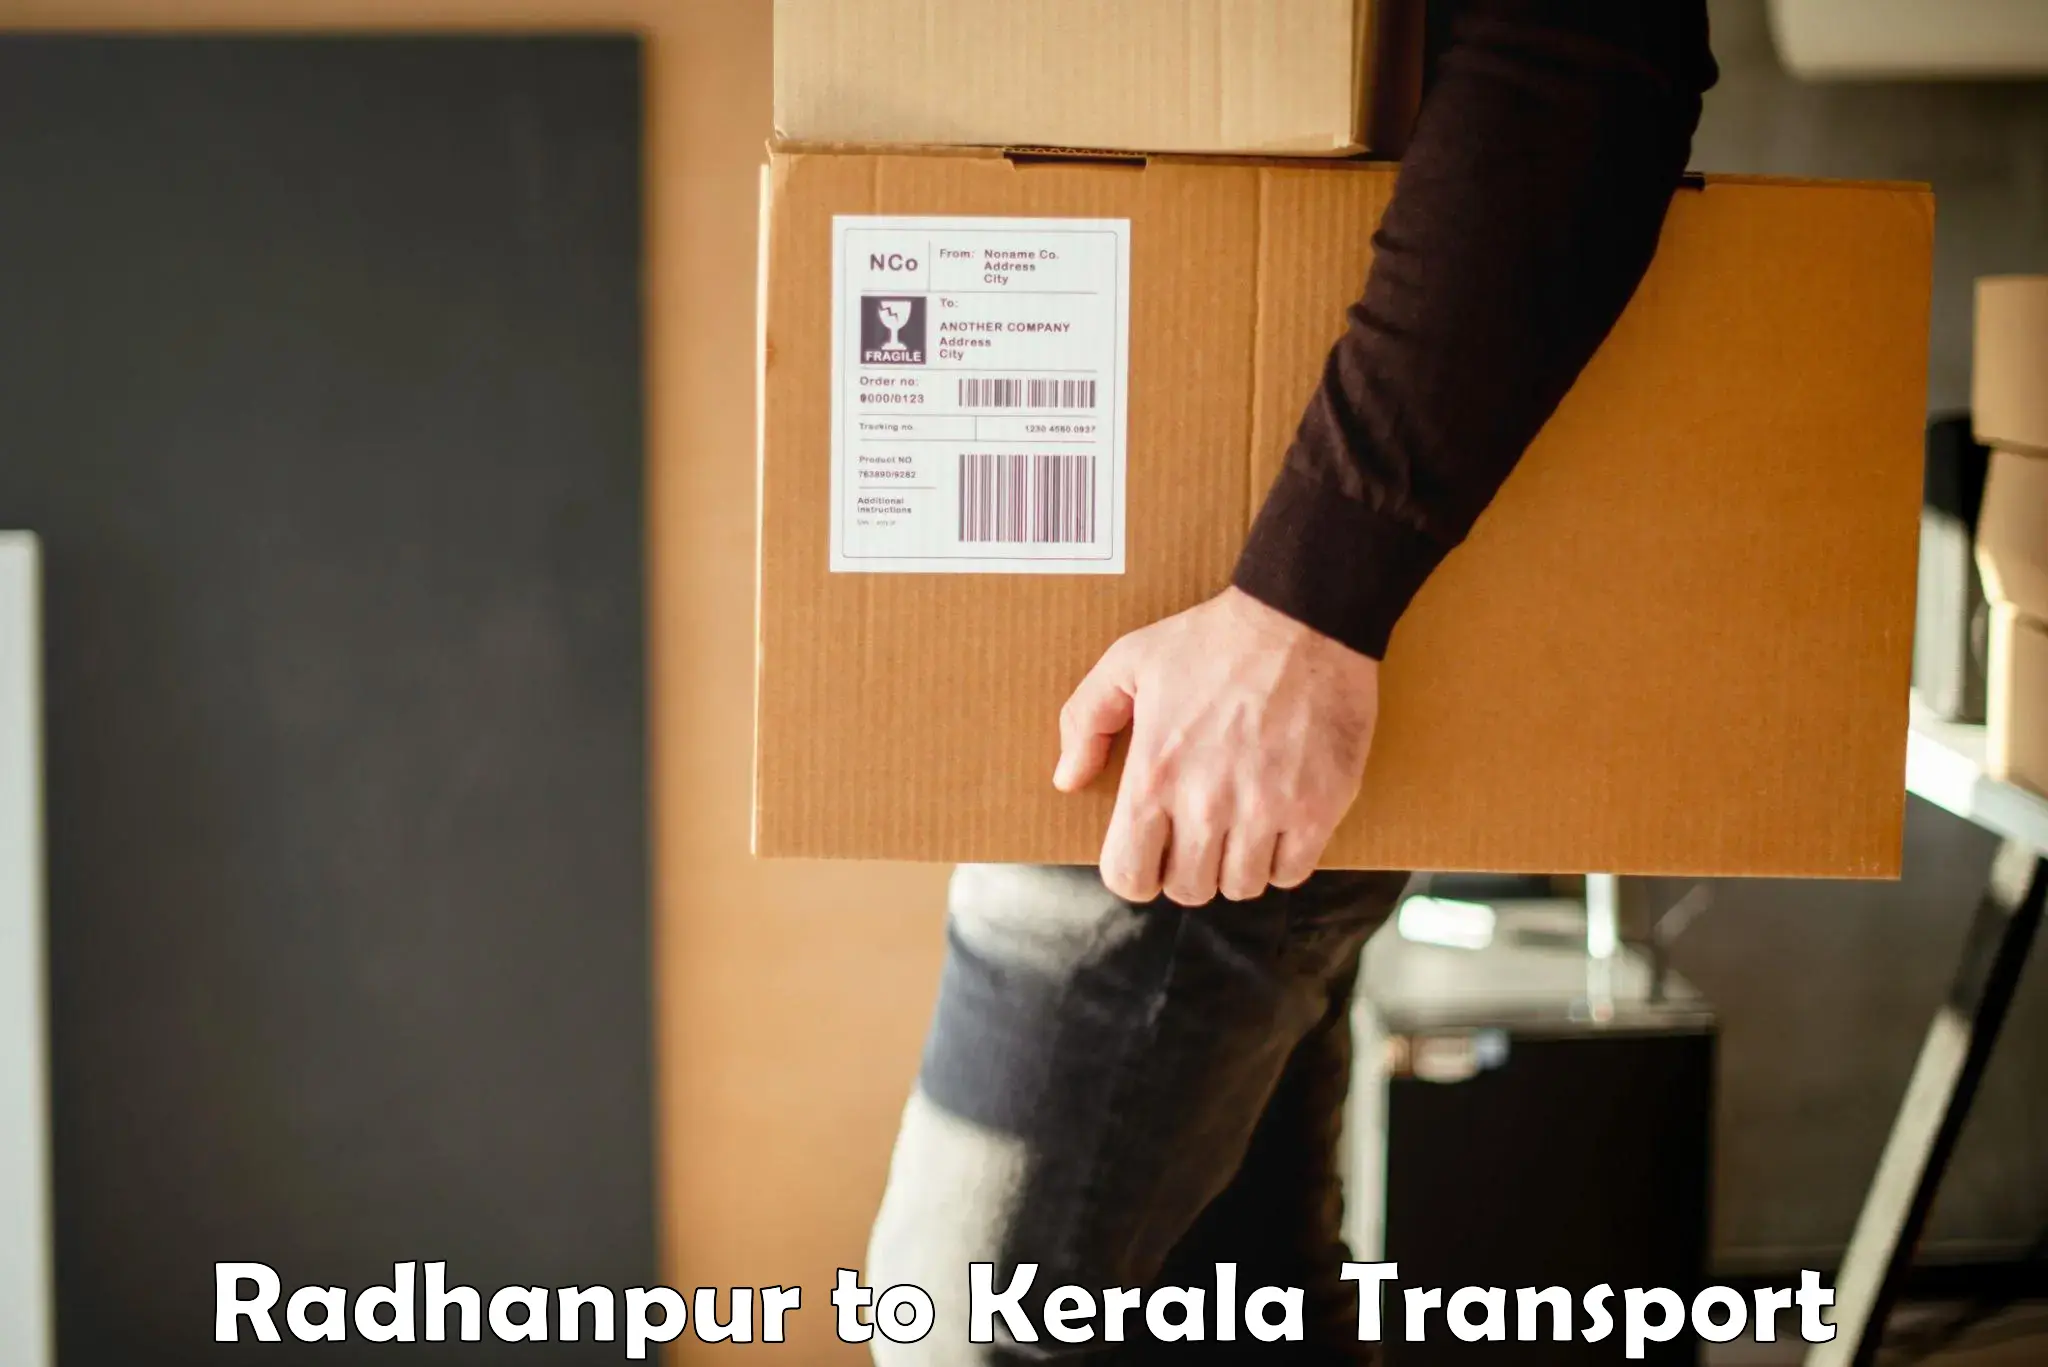 Goods delivery service Radhanpur to Kochi